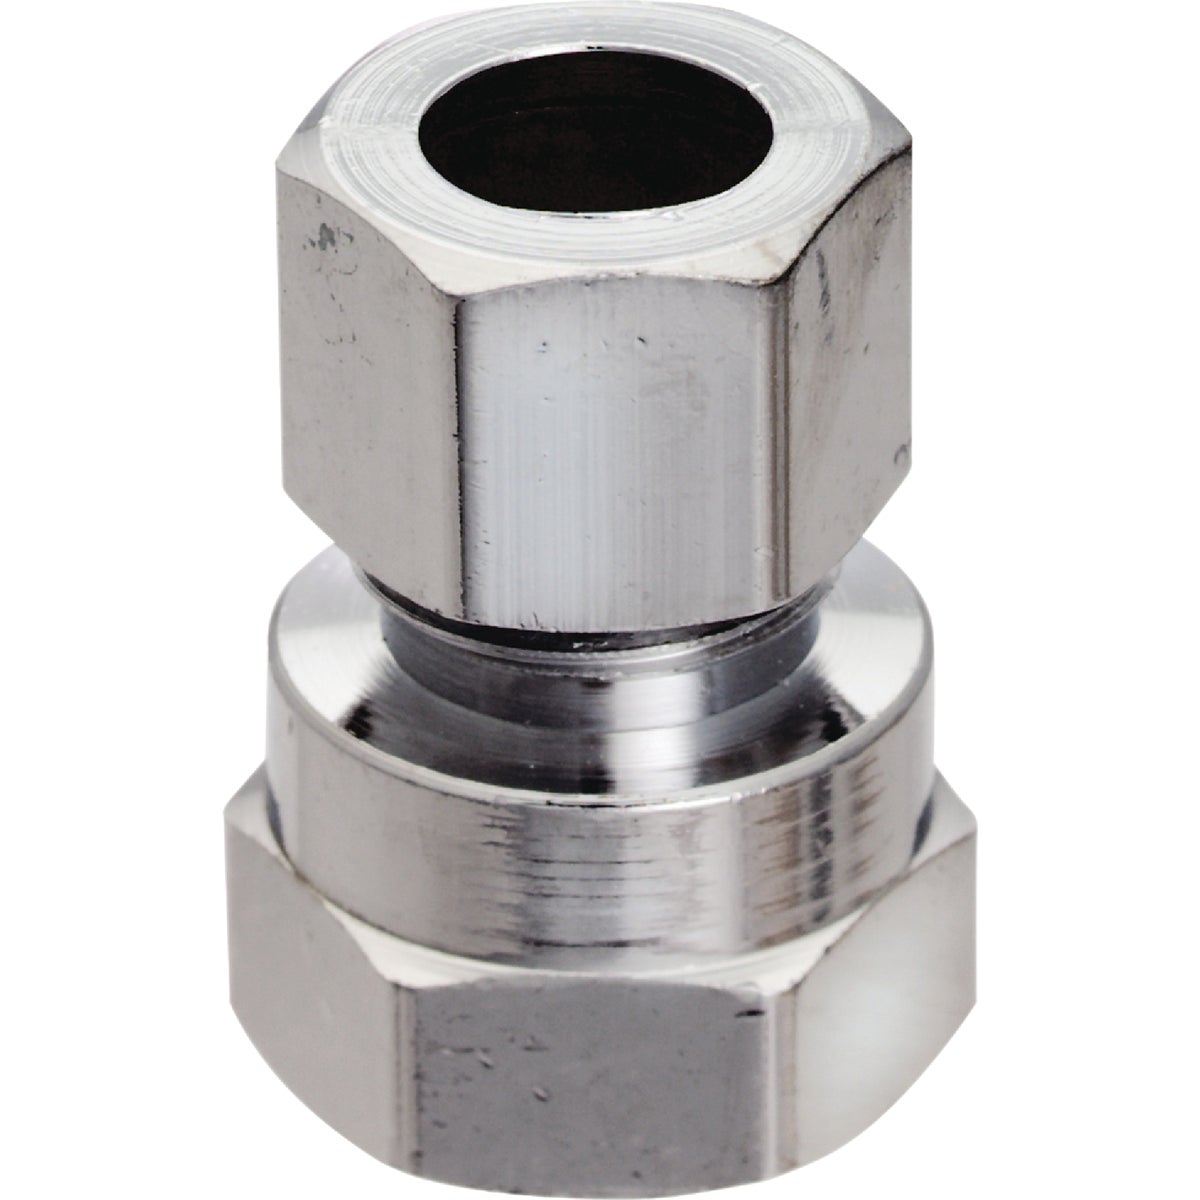 Item 455901, Straight connector. Female fitting. Manufactured to include no more than 0.